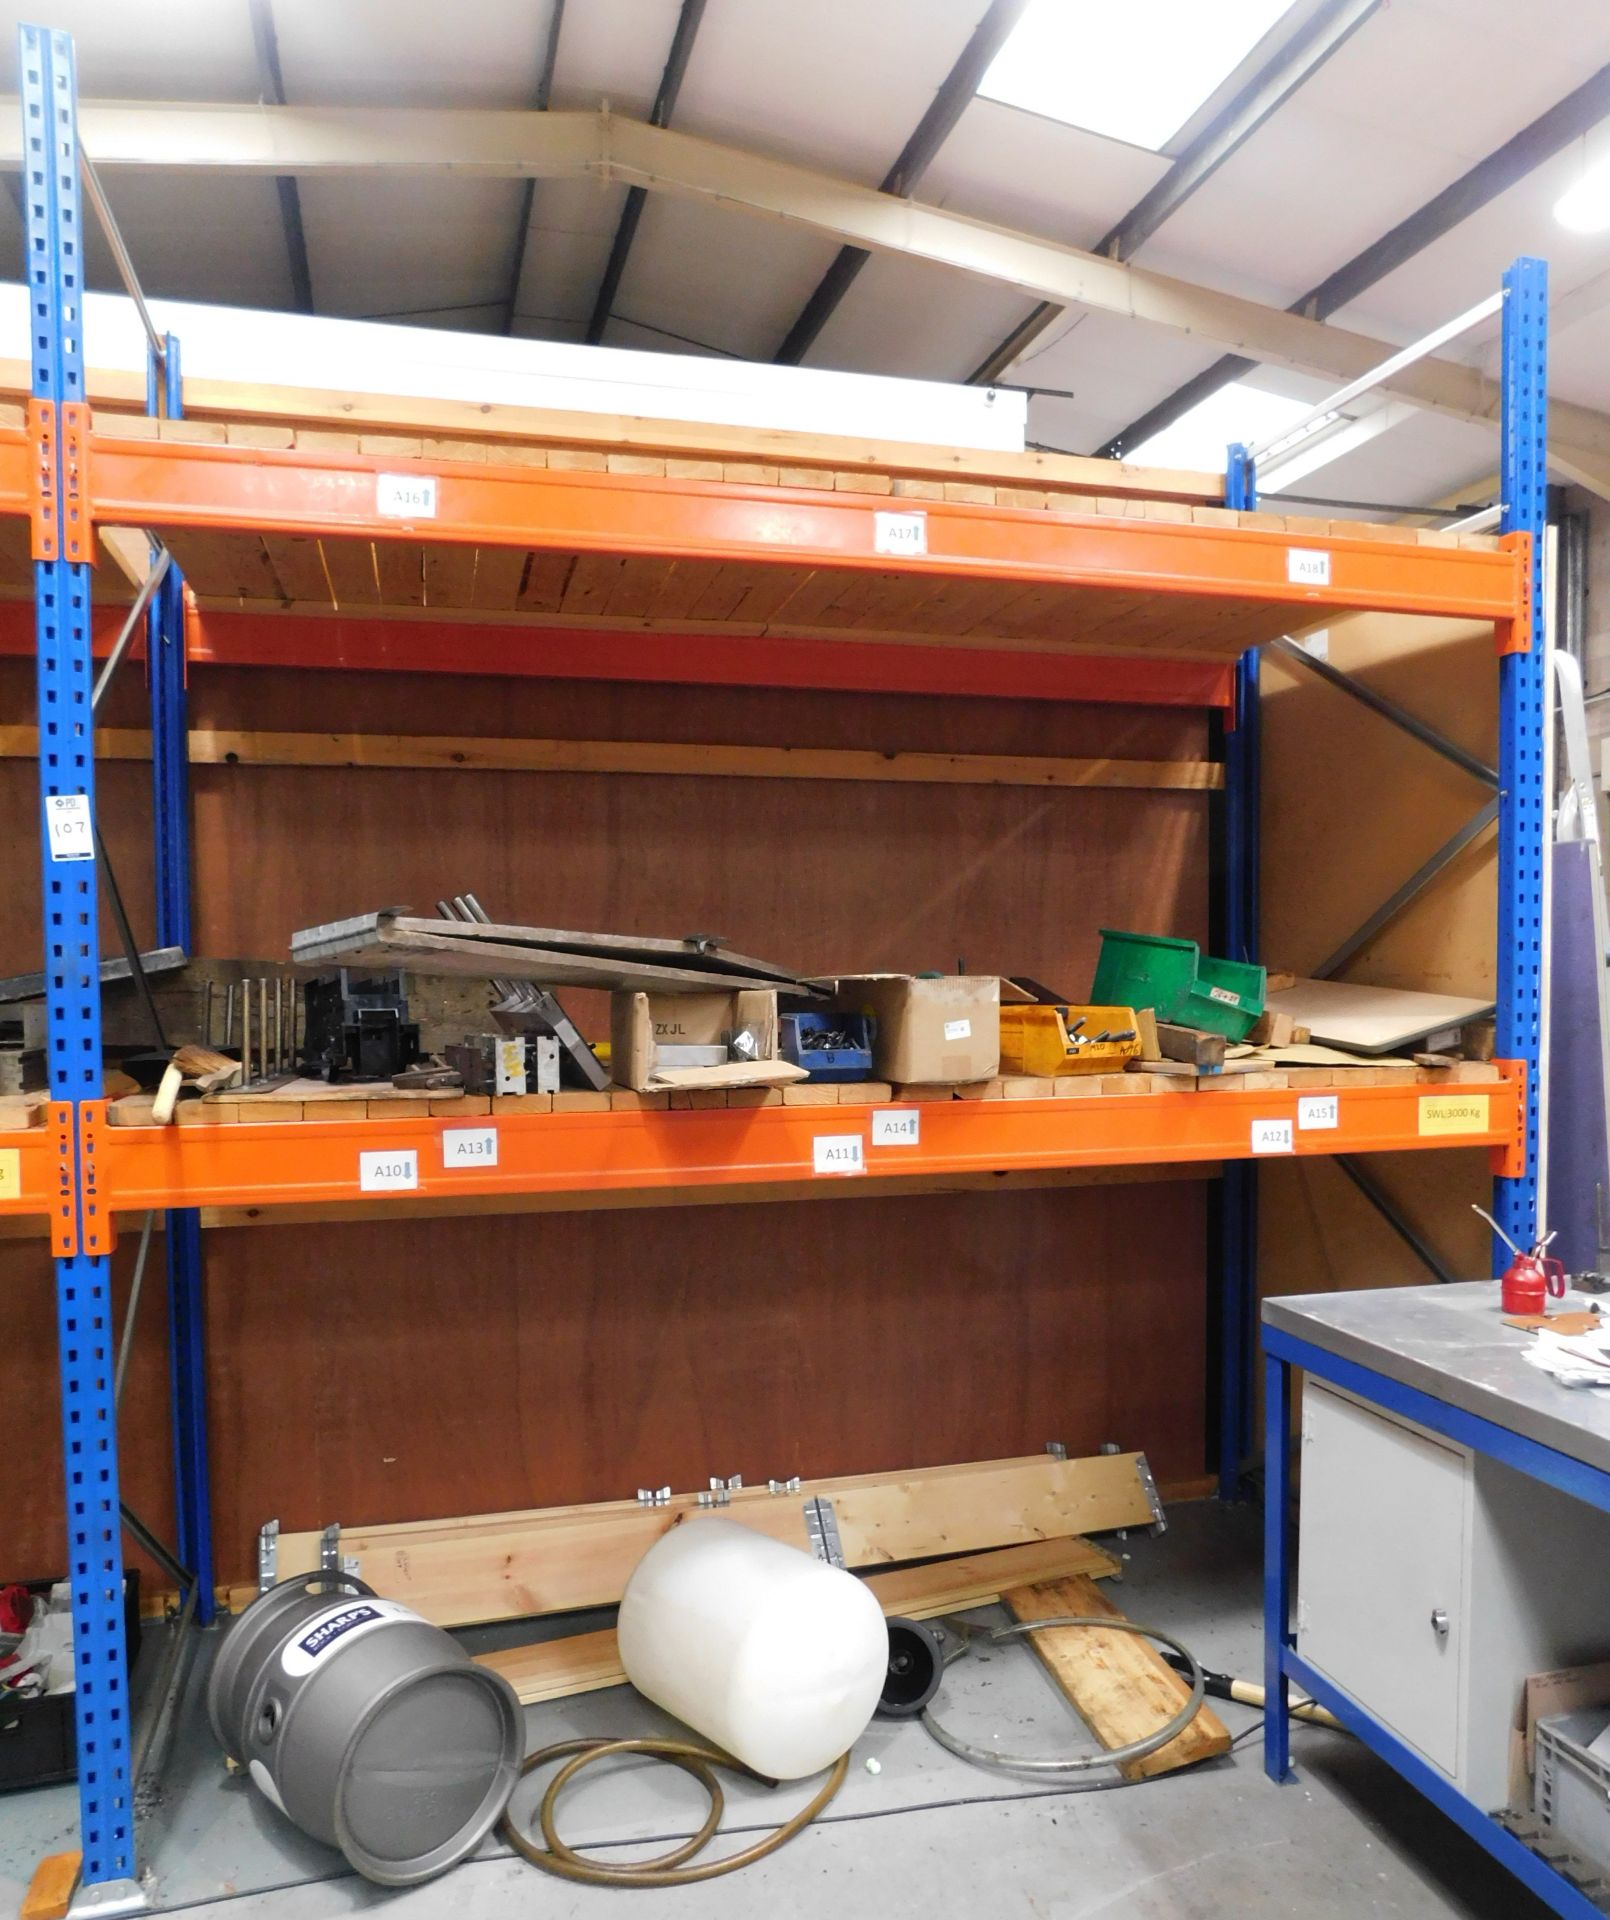 2 Bays of Boltless Pallet Racking & Contents (Excluding 3rd Party Tooling)  (Located North - Image 2 of 9